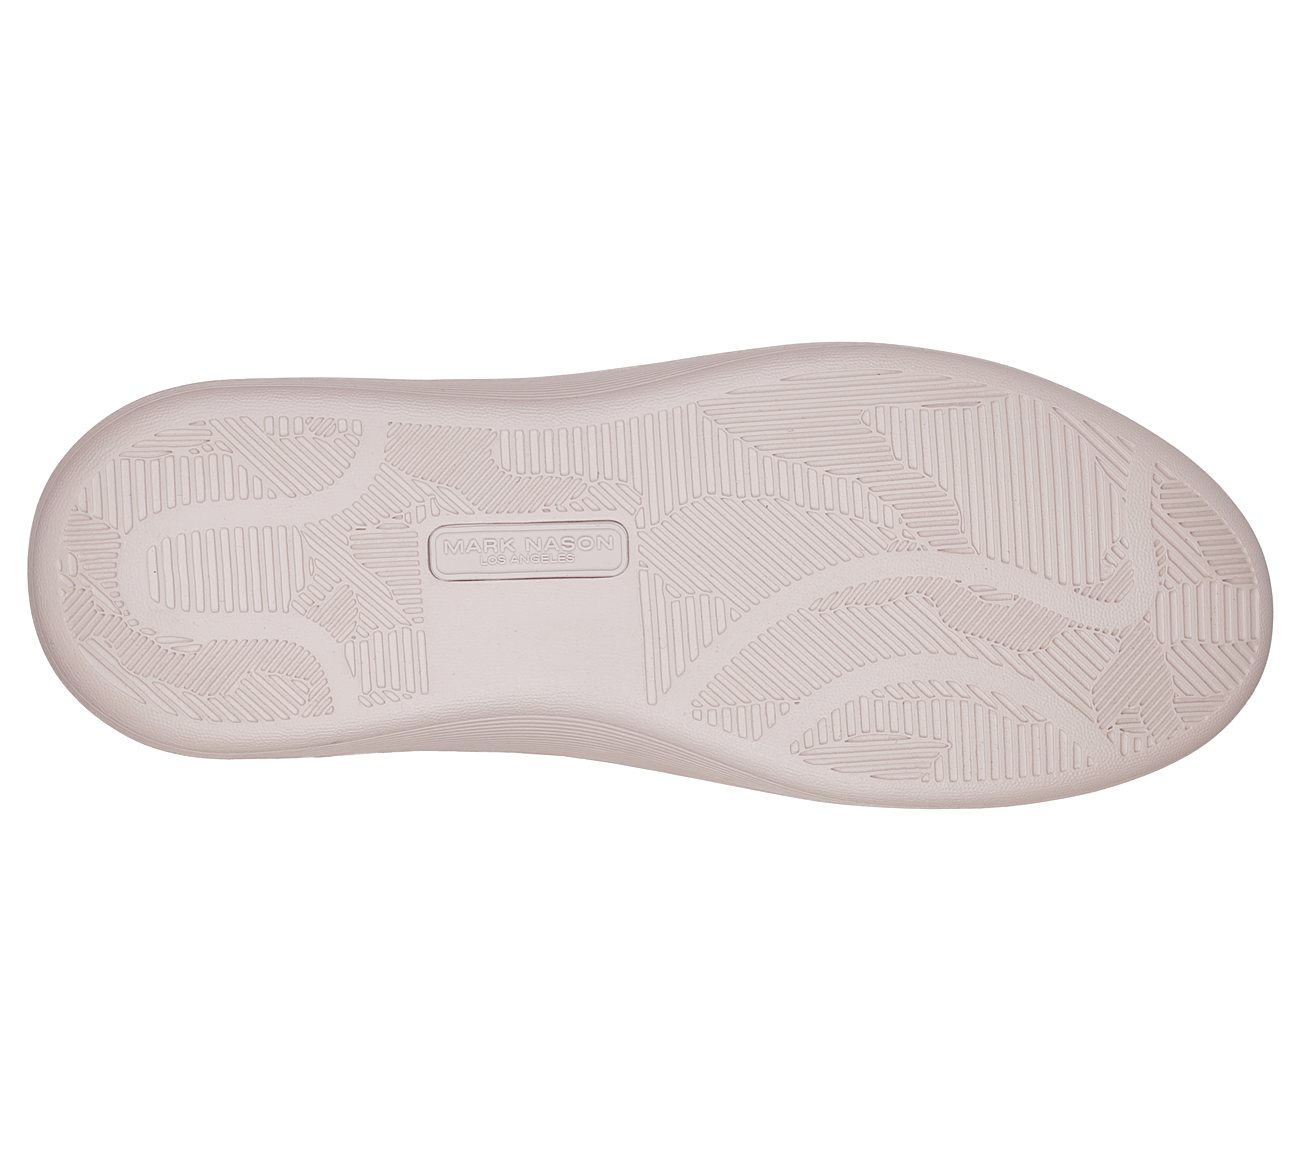 RECORD - NEWBERRY, PPINK Footwear Bottom View